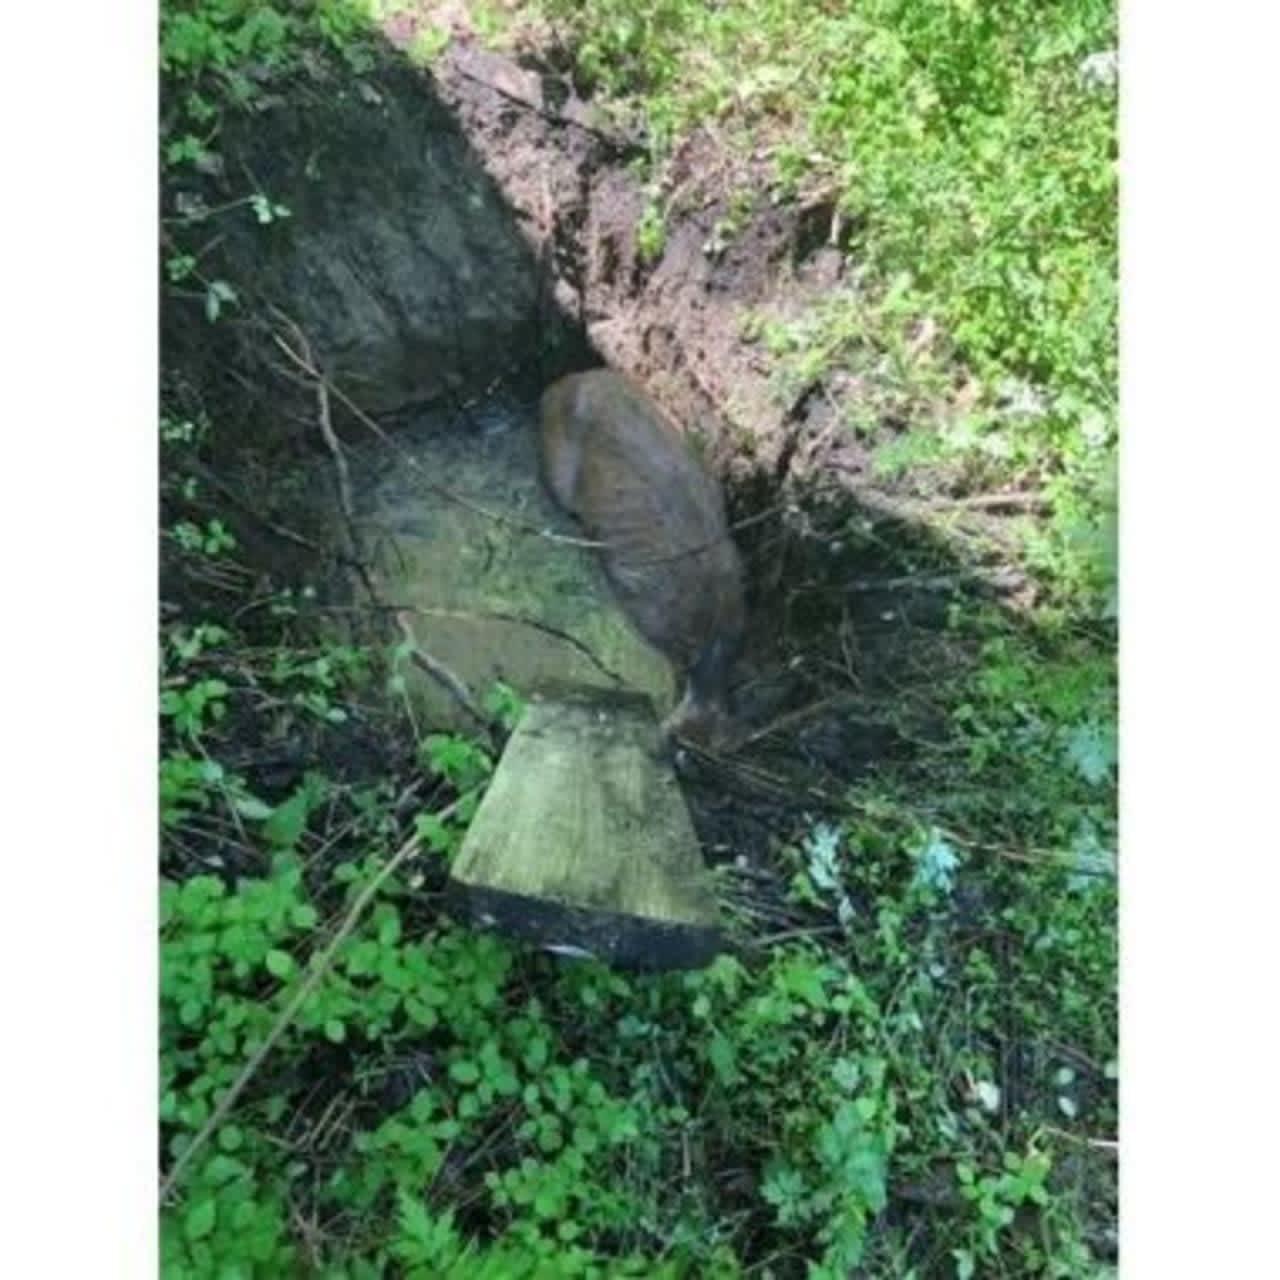 Officers rescued a deer that fell through the top of an abandoned septic tank in Sullivan County.